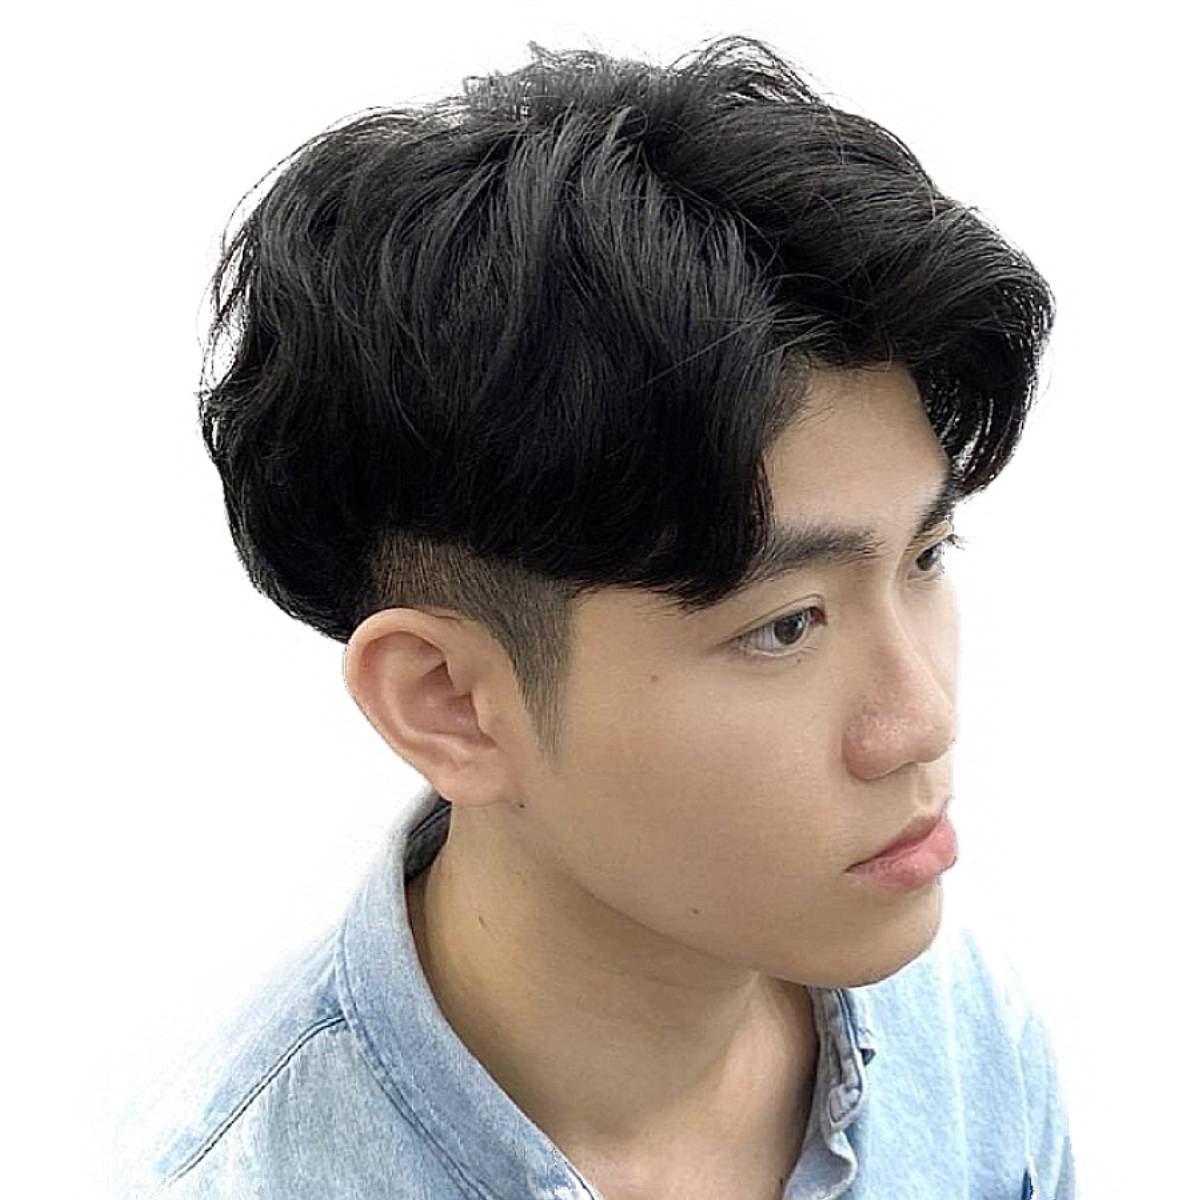 Best Summer Hairstyles for Asian Men in 2023 - YouTube